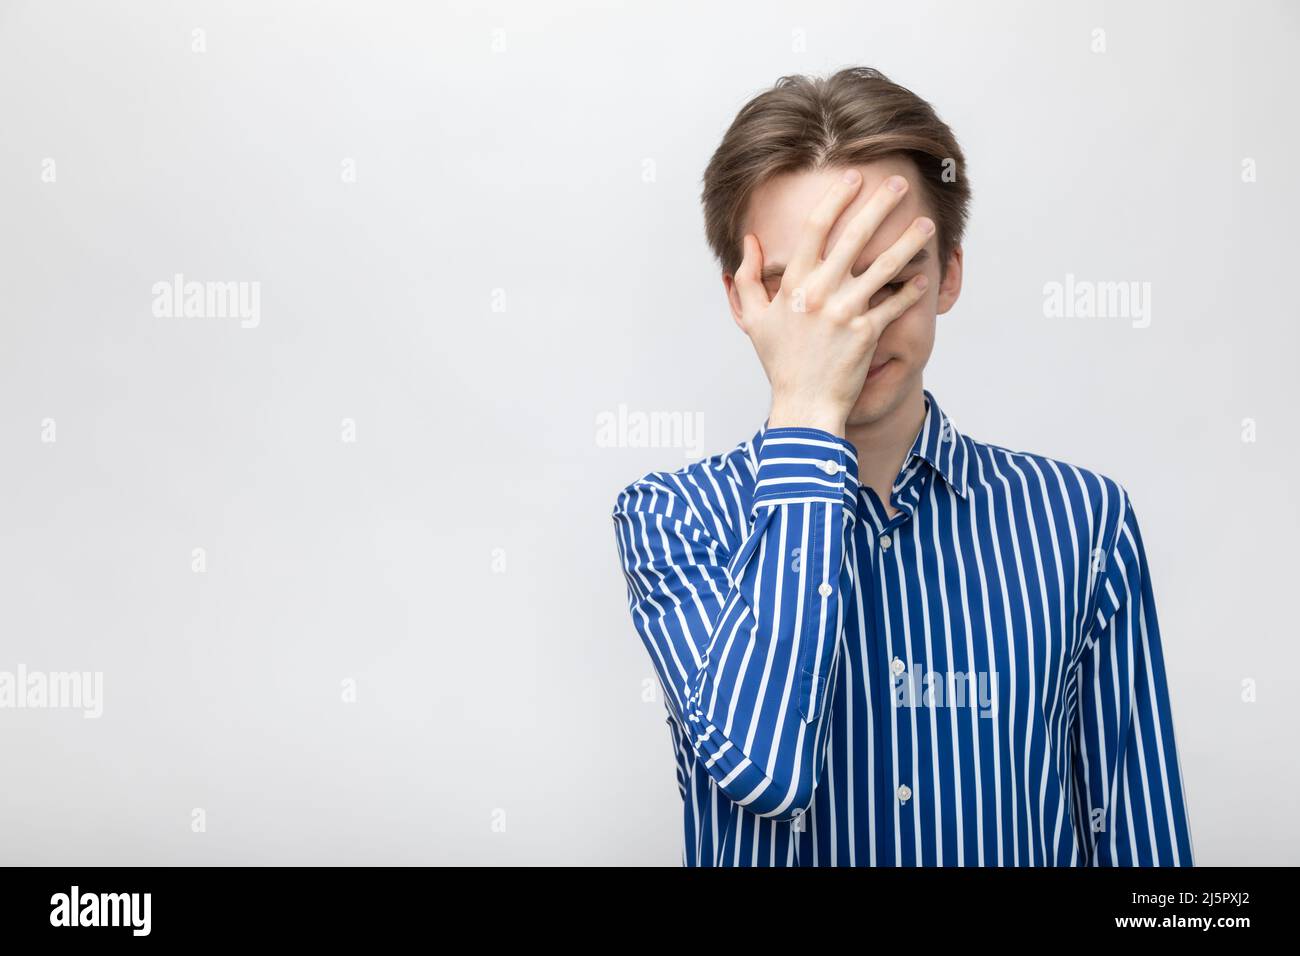 Portrait of young man wearing blue-white striped button shirt covering his eyes and face with palm. Studio shot on gray background Stock Photo